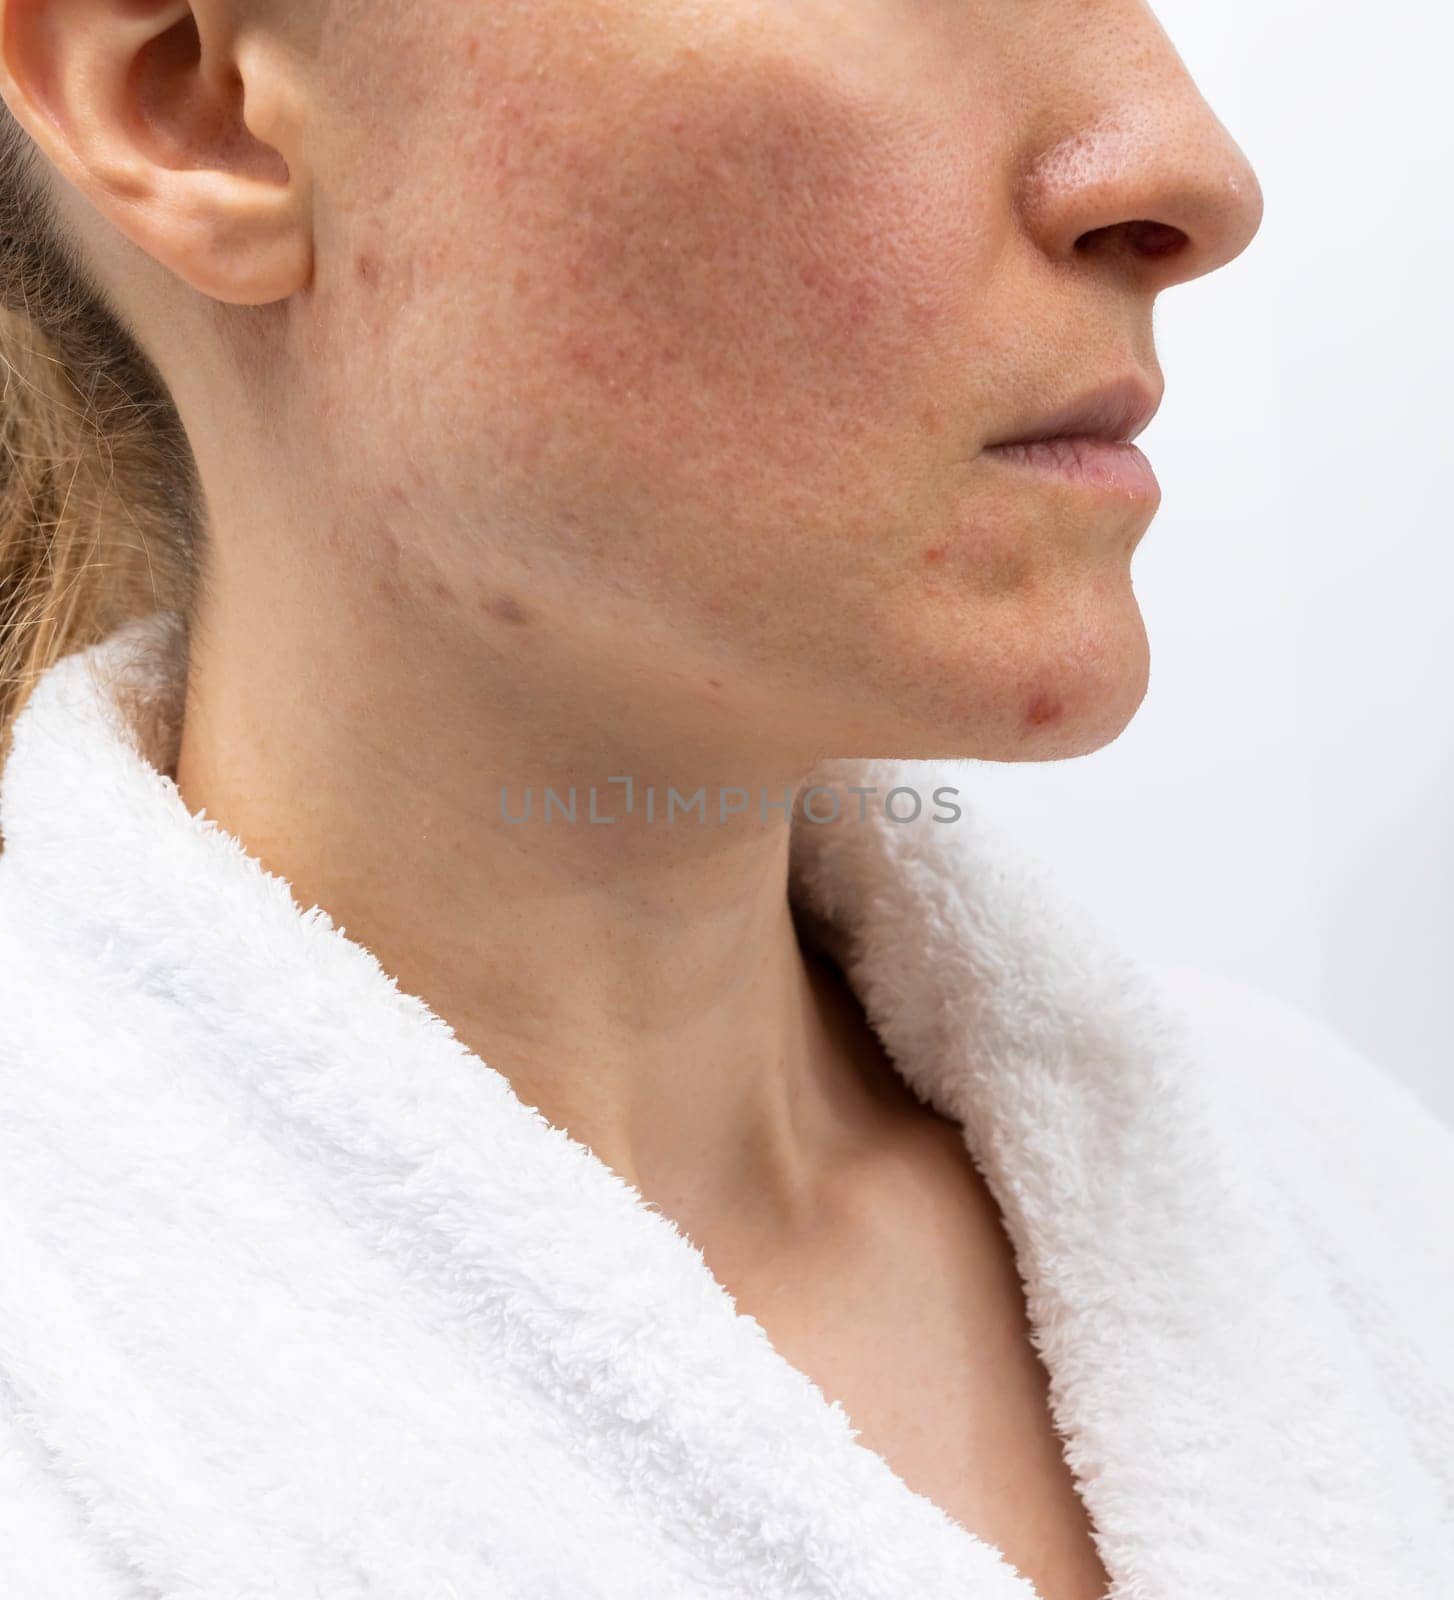 Closeup Face of Woman in her 30s with Acne Problem, Couperosis, Scarring, Blackheads. Vertical Plane, Adult Skin Problem. Cosmetics and Healthcare, Beauty Concept. Rosacea. by netatsi